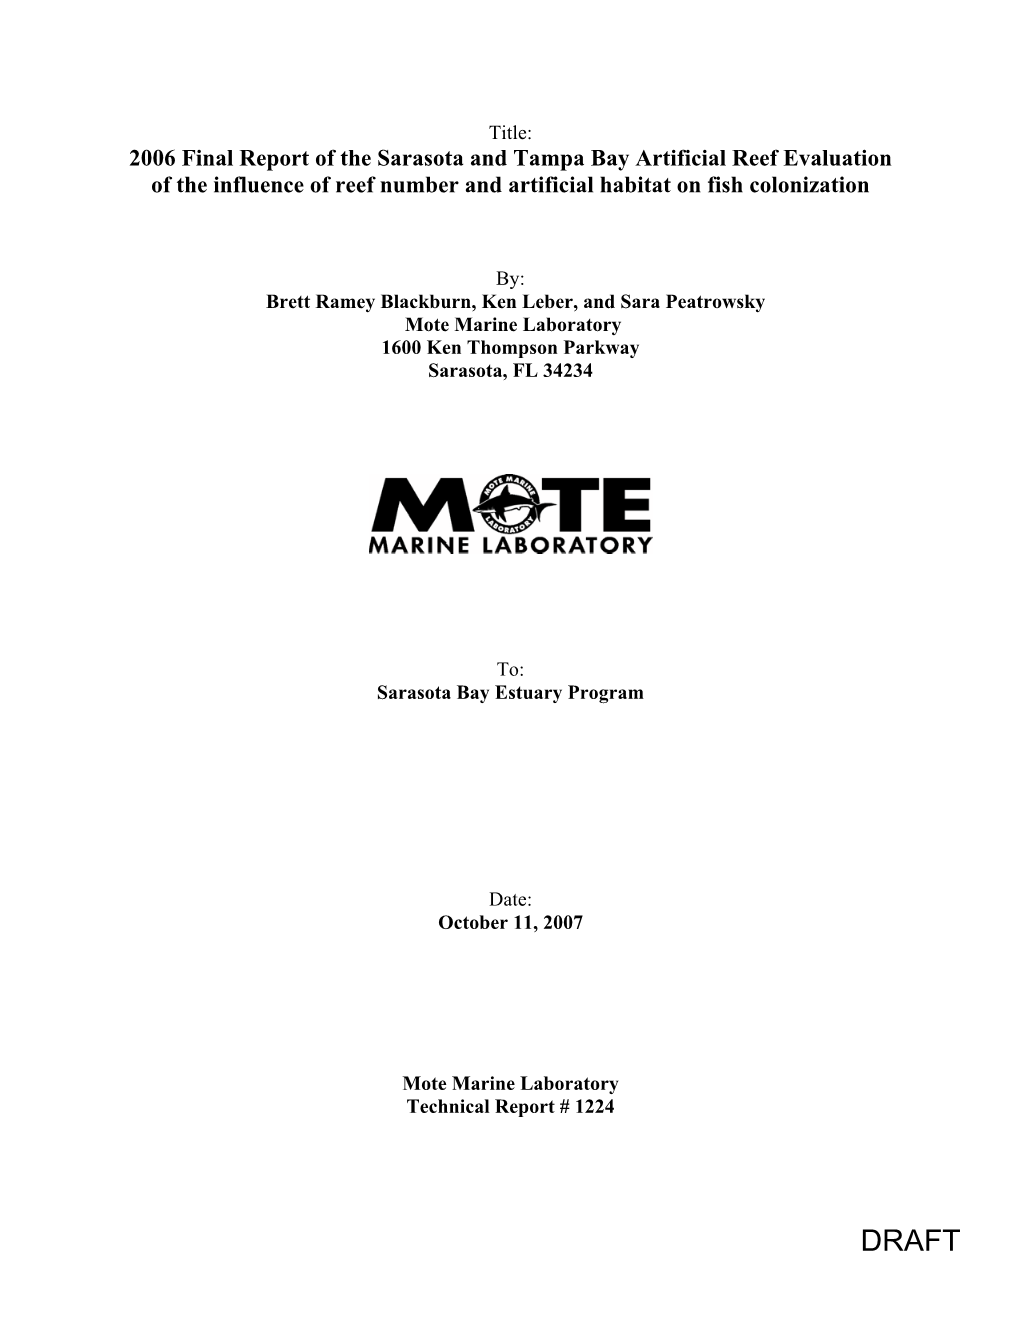 2006 Final Report of the Sarasota and Tampa Bay Artificial Reef Evaluation of the Influence of Reef Number and Artificial Habitat on Fish Colonization